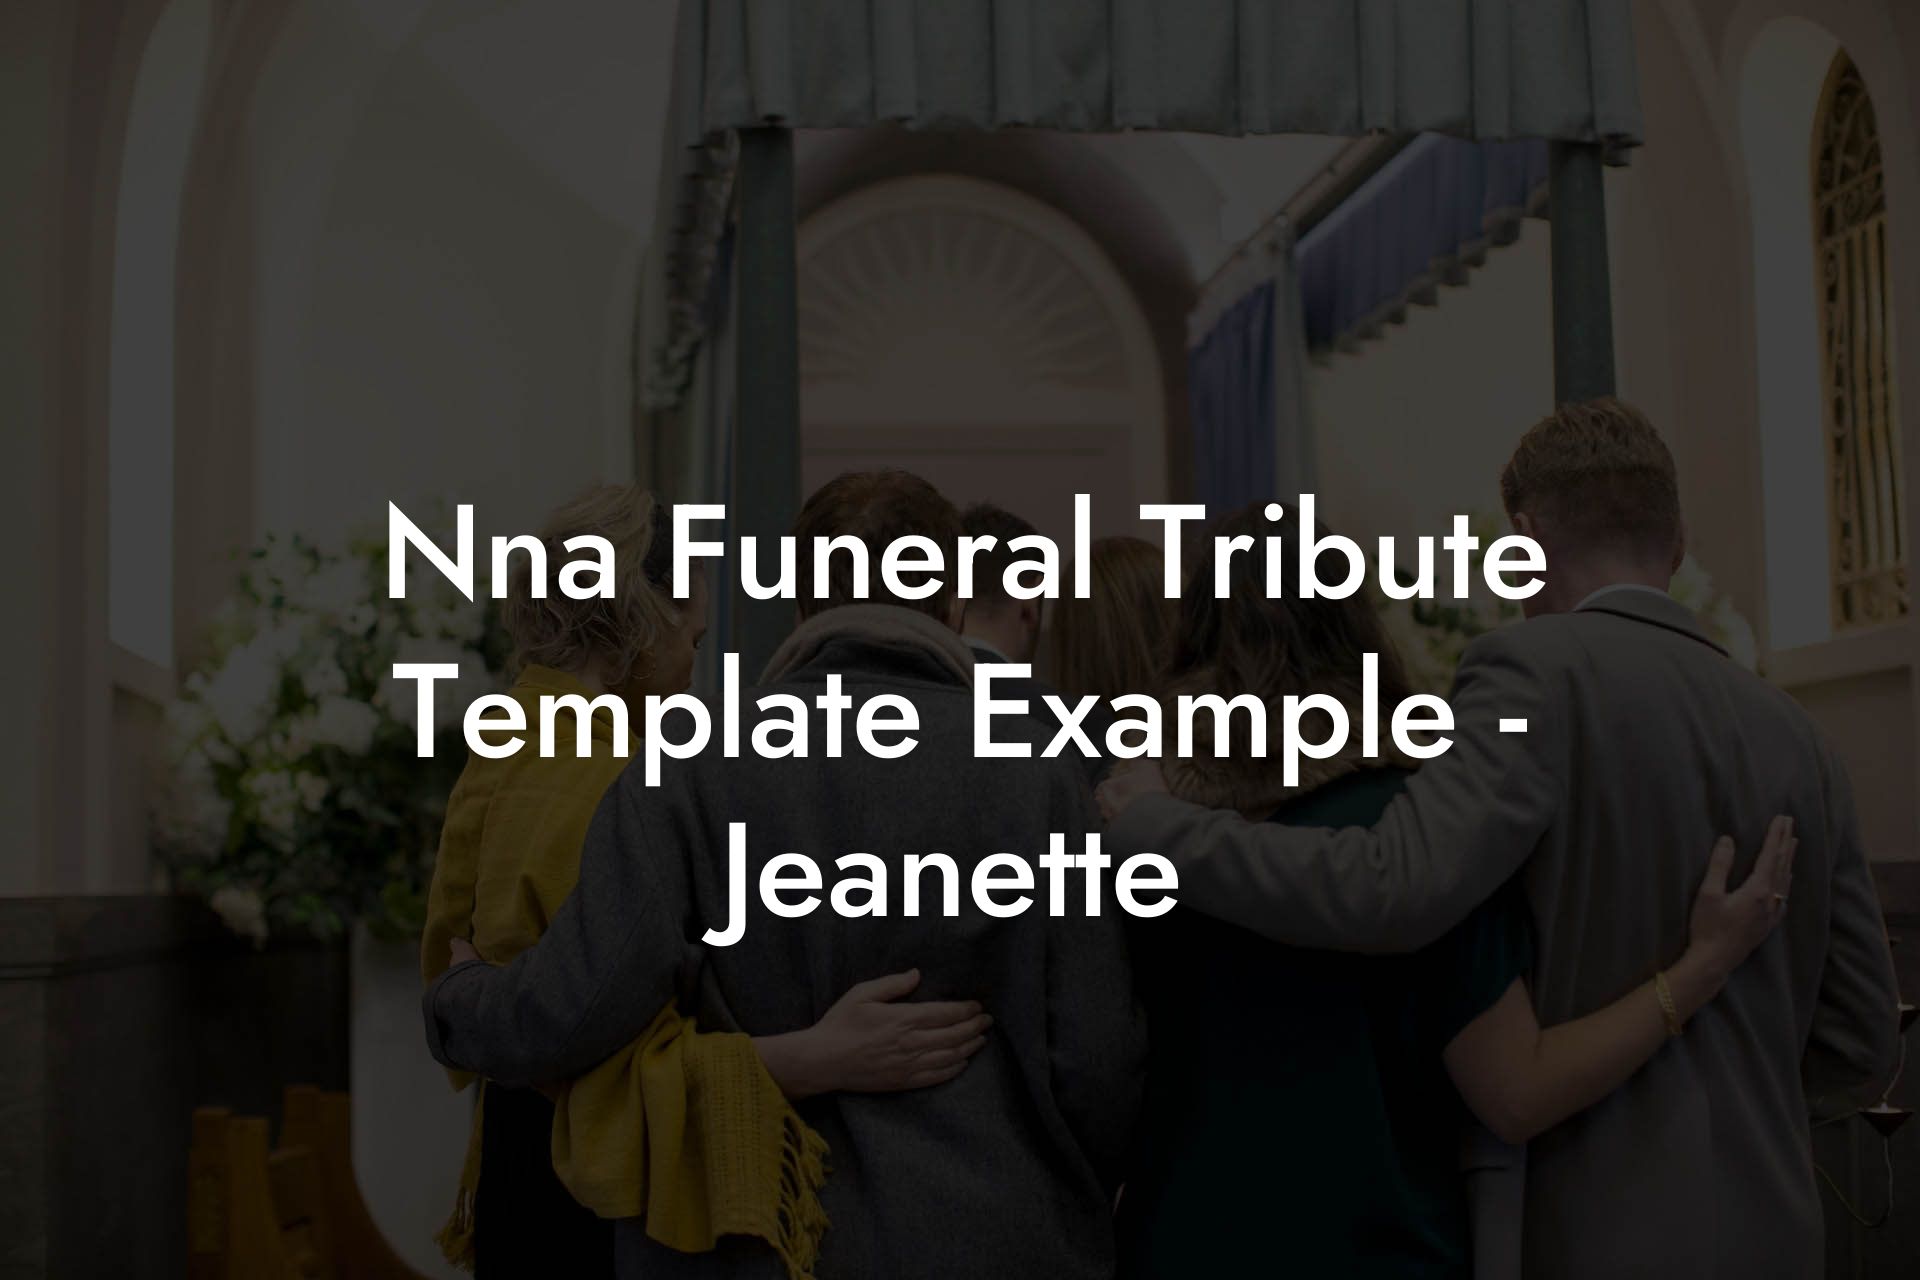 Nna Funeral Tribute Template Example - Jeanette